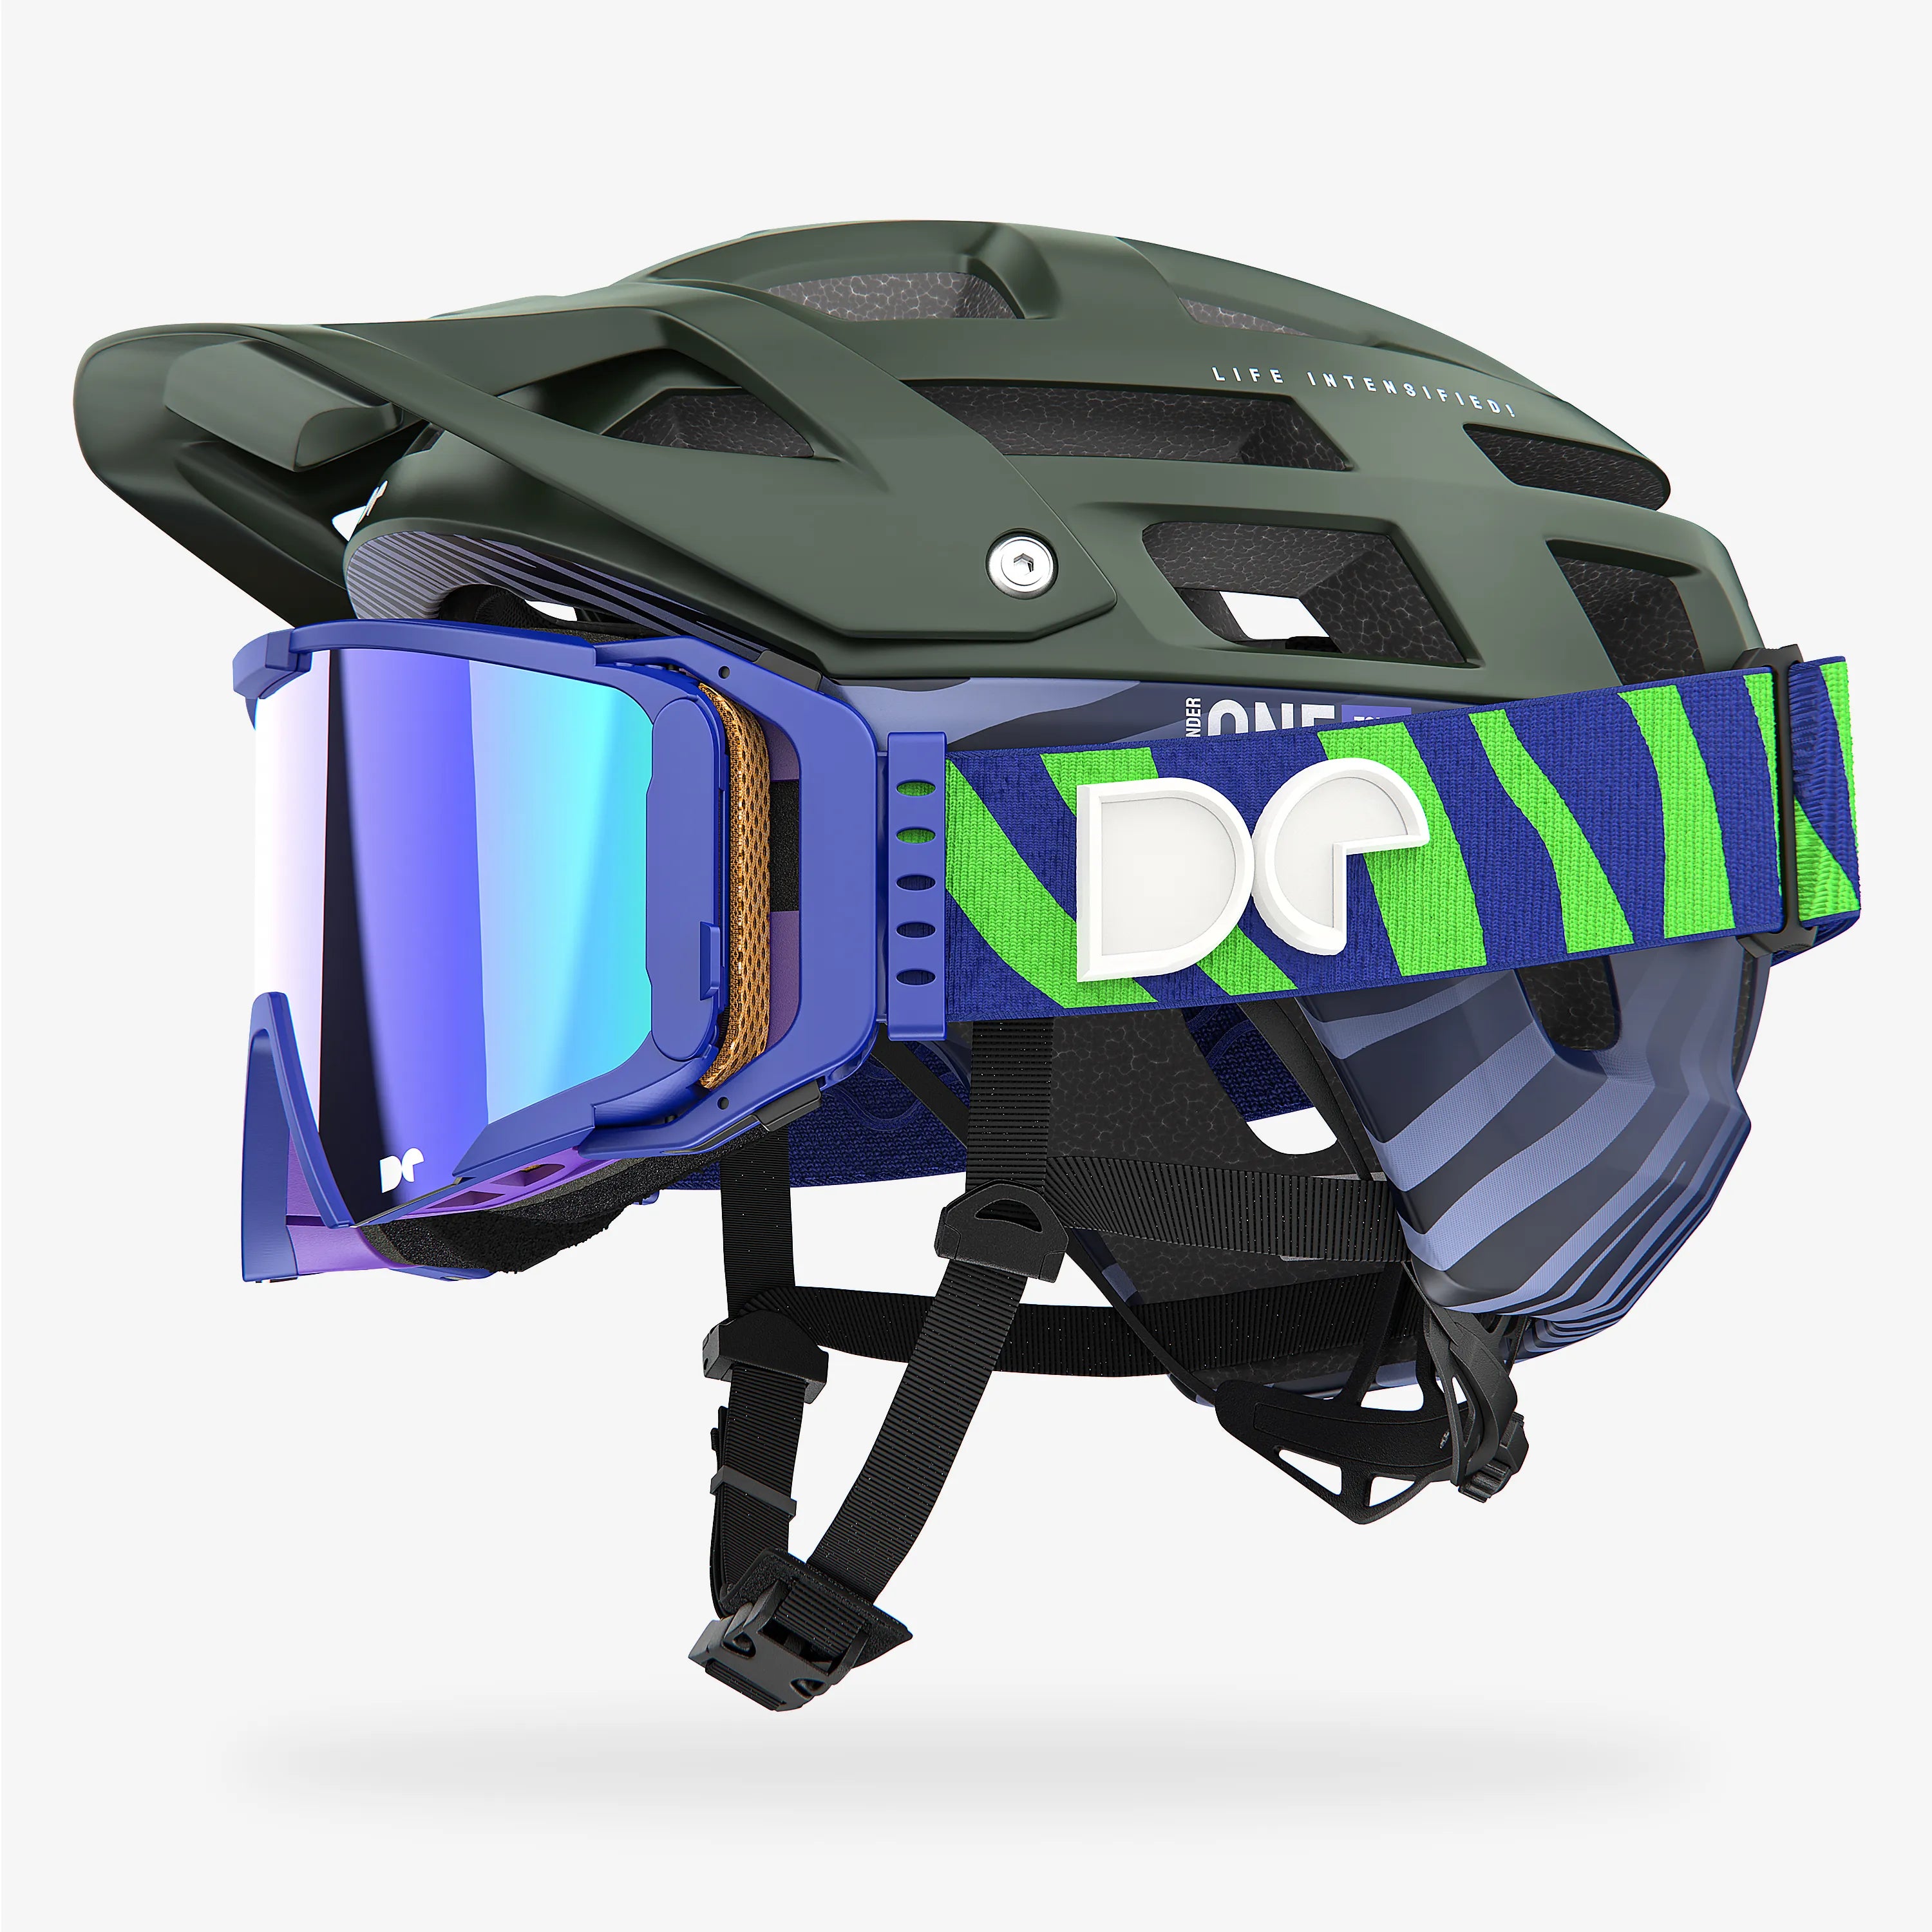 Mountainbike-Helm Defender One Tour Forest Green + Schutzbrille Sporter Boostup All Road